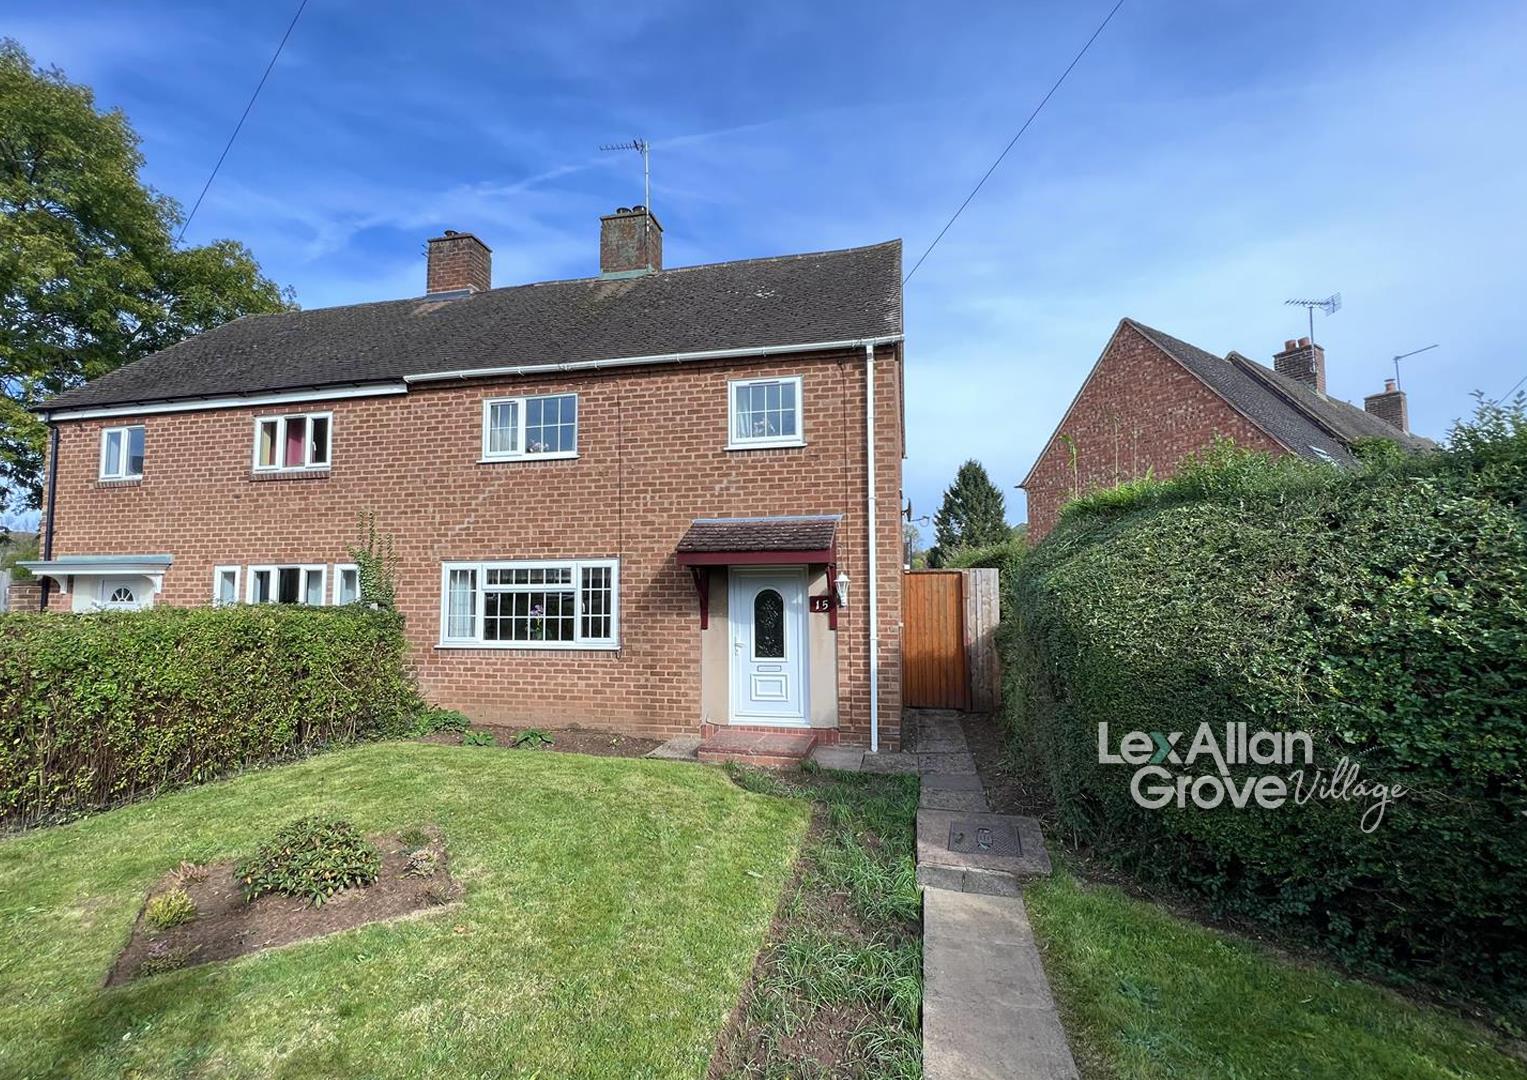 3 bed semi-detached house for sale in Kings Meadow, Stourbridge - Property Image 1